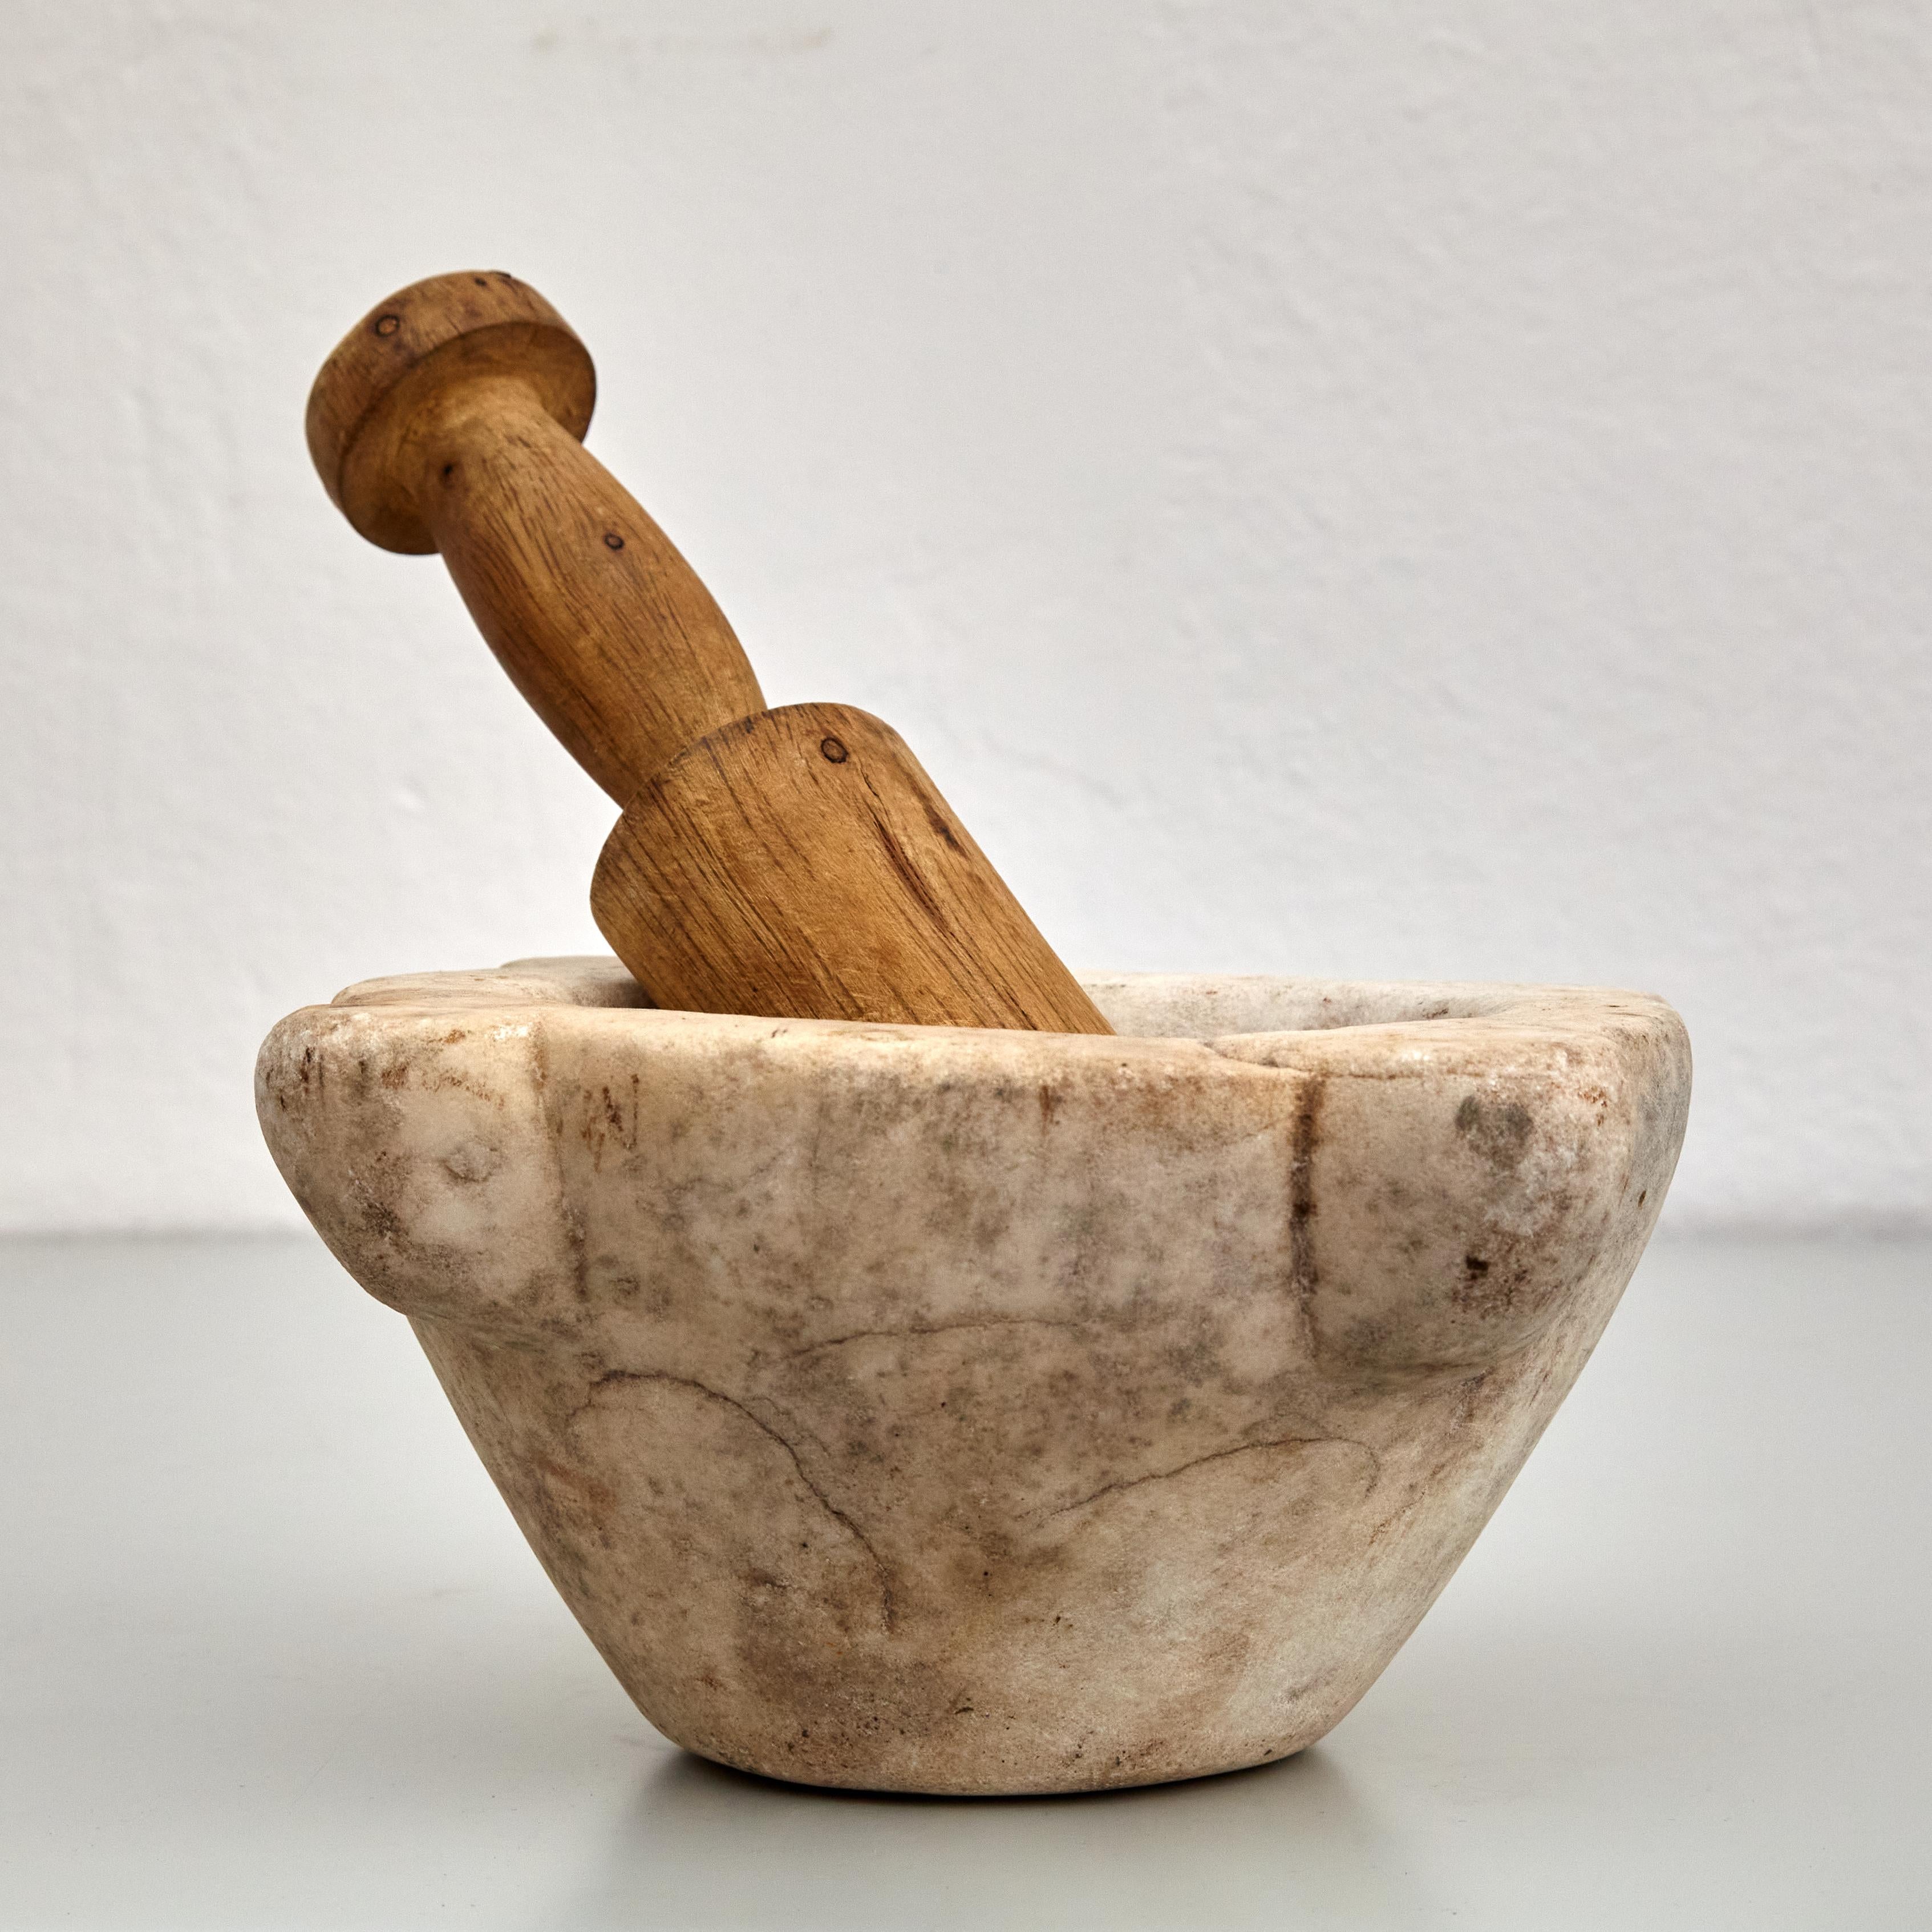 Traditional Mid-Century Modern Spanish Mortar.

Manufactured in Spain, circa 1940.

In original condition with minor wear consistent of age and use, preserving a beautiful patina.

Materials: 
Stone, wood 

Dimensions: 
Diam 26 cm x H 11.5